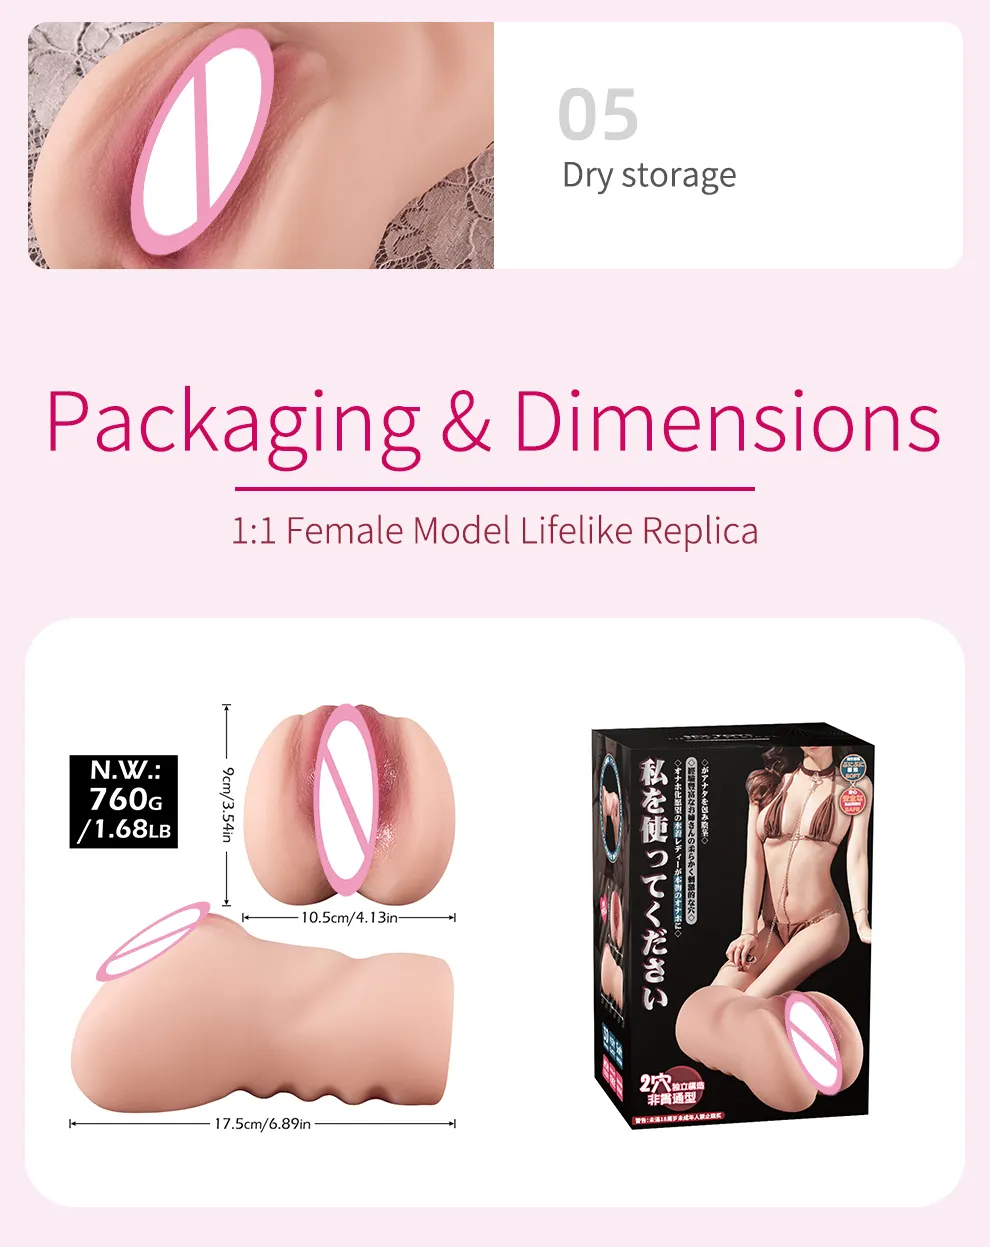 Wholesale Pocket Pussy Doll 2 in 1 Tight Vagina Anal 3D Male Masturbators sex Doll Realistic Pocket Pussy sex Doll for men